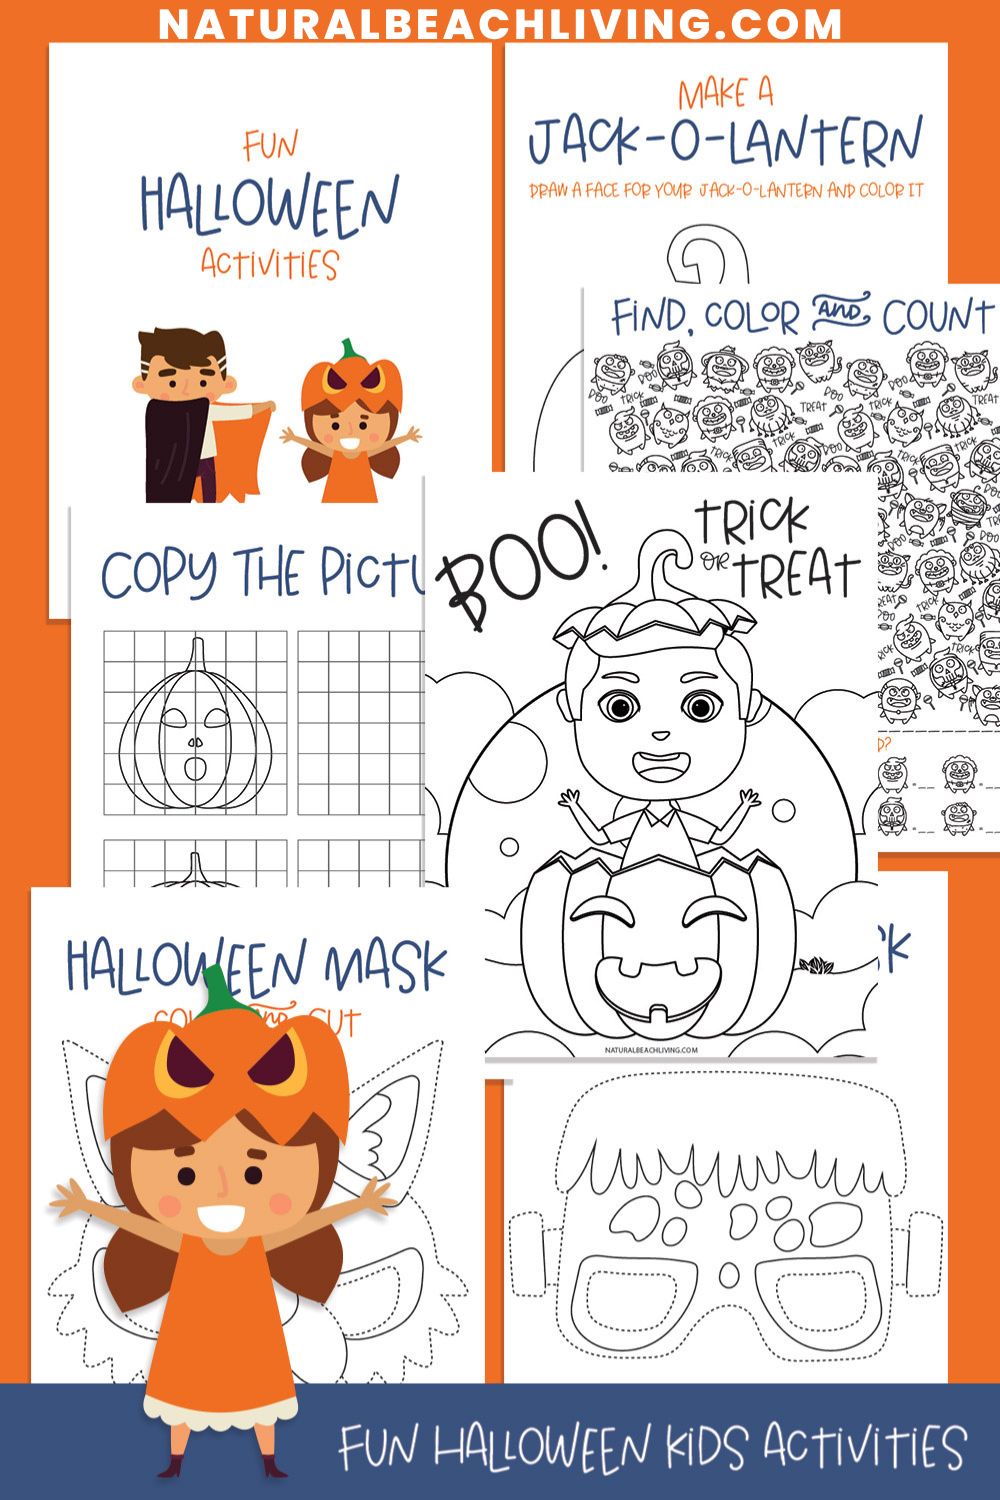 Halloween At Home: Crafts, Books, Activities, & Costumes For Kids and  Families